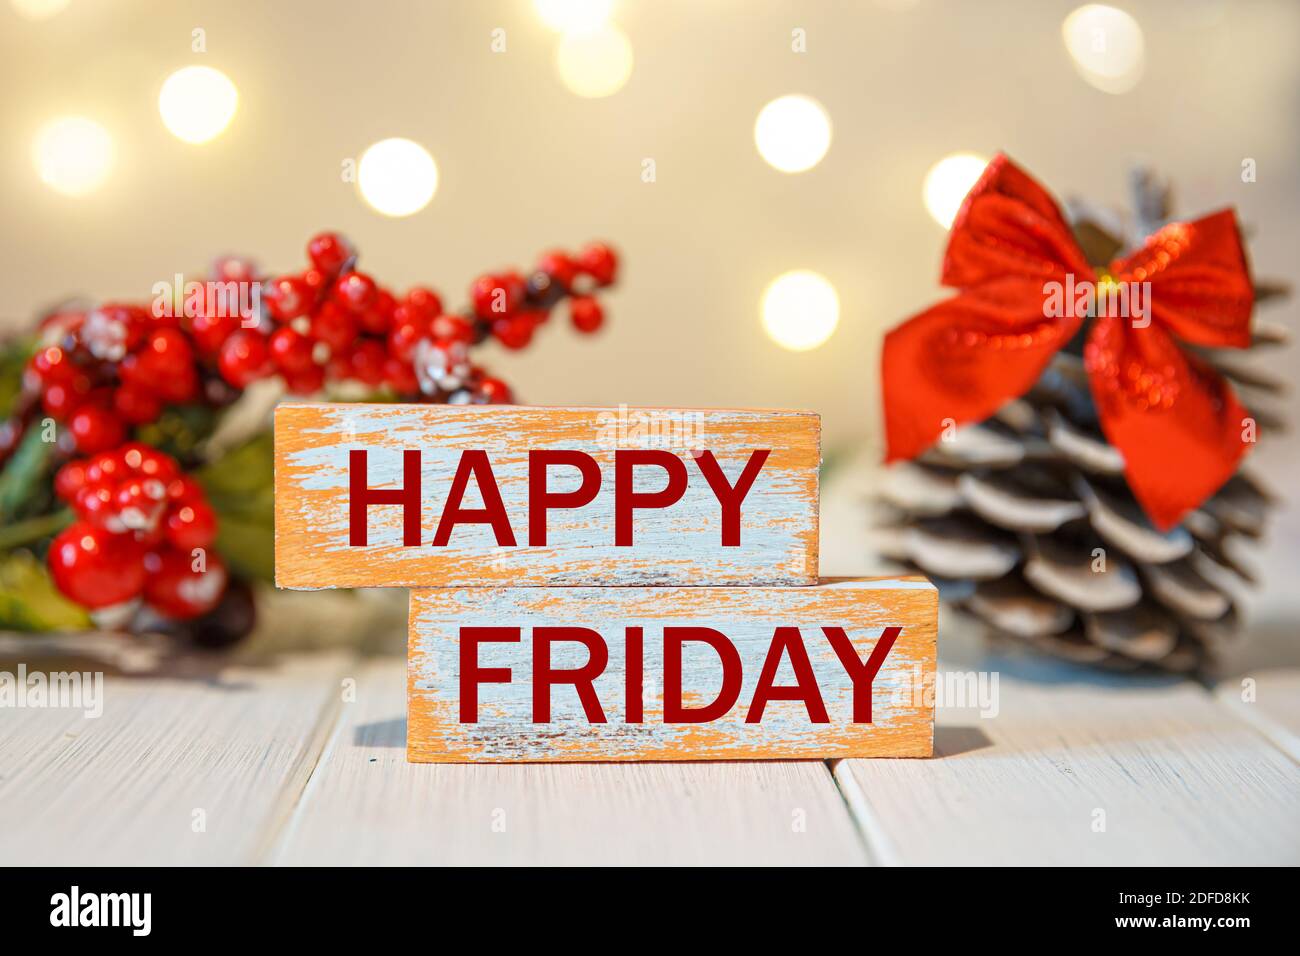 Happy Friday word written on wood block. Happy Friday text on ...